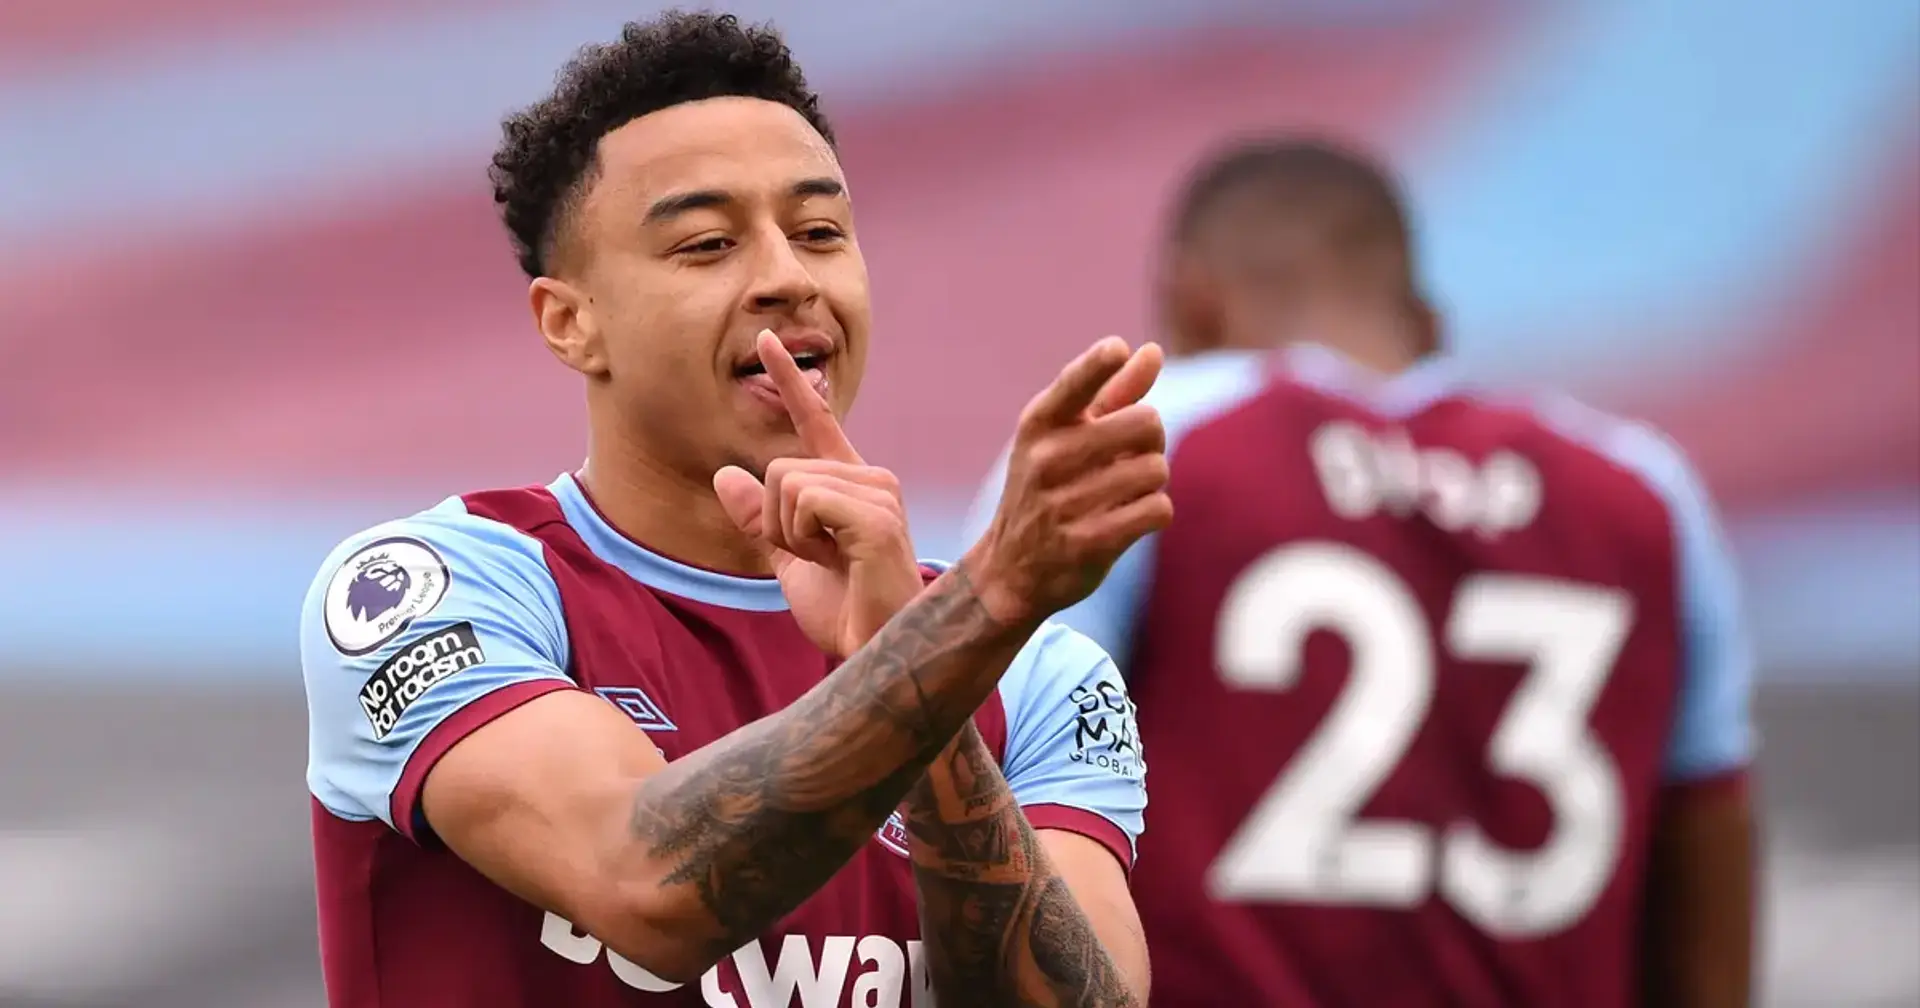 'He hasn't had the luck at Man United': West Ham's Aaron Cresswell reacts to Jesse Lingard's resurgence